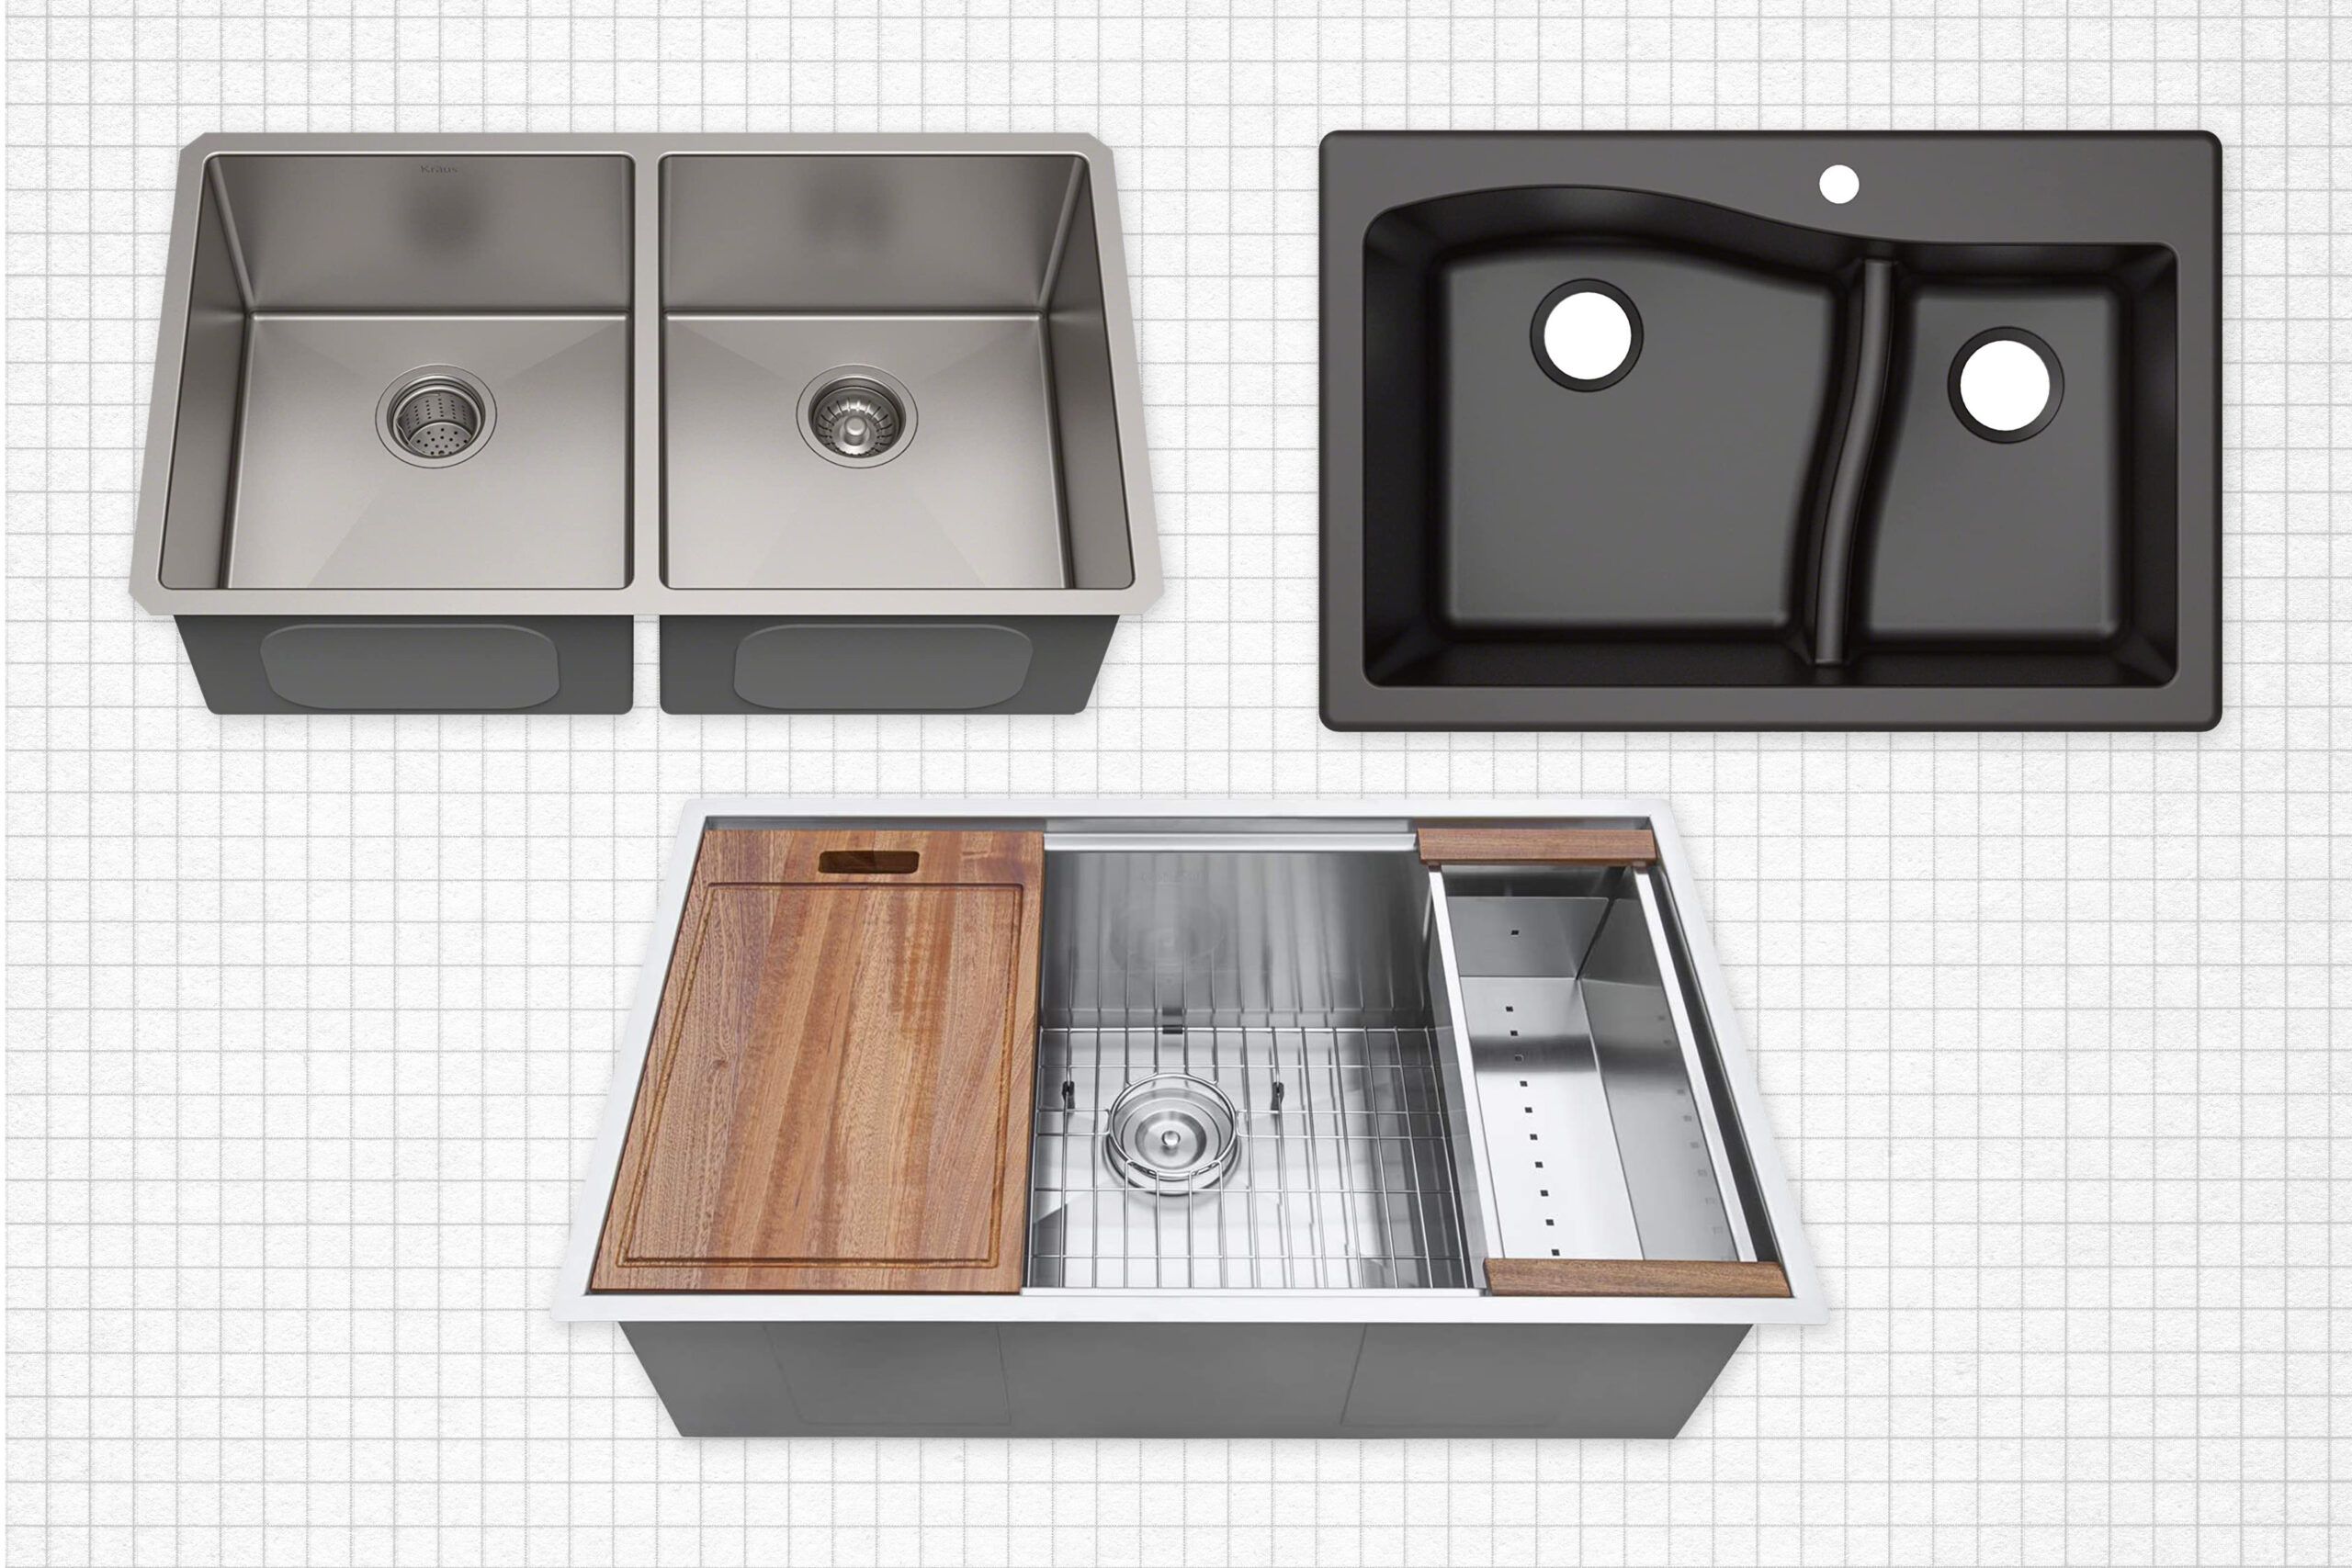 Three double basin kitchen sinks against a grey graph paper background. Lead image for the best kitchen sink guide